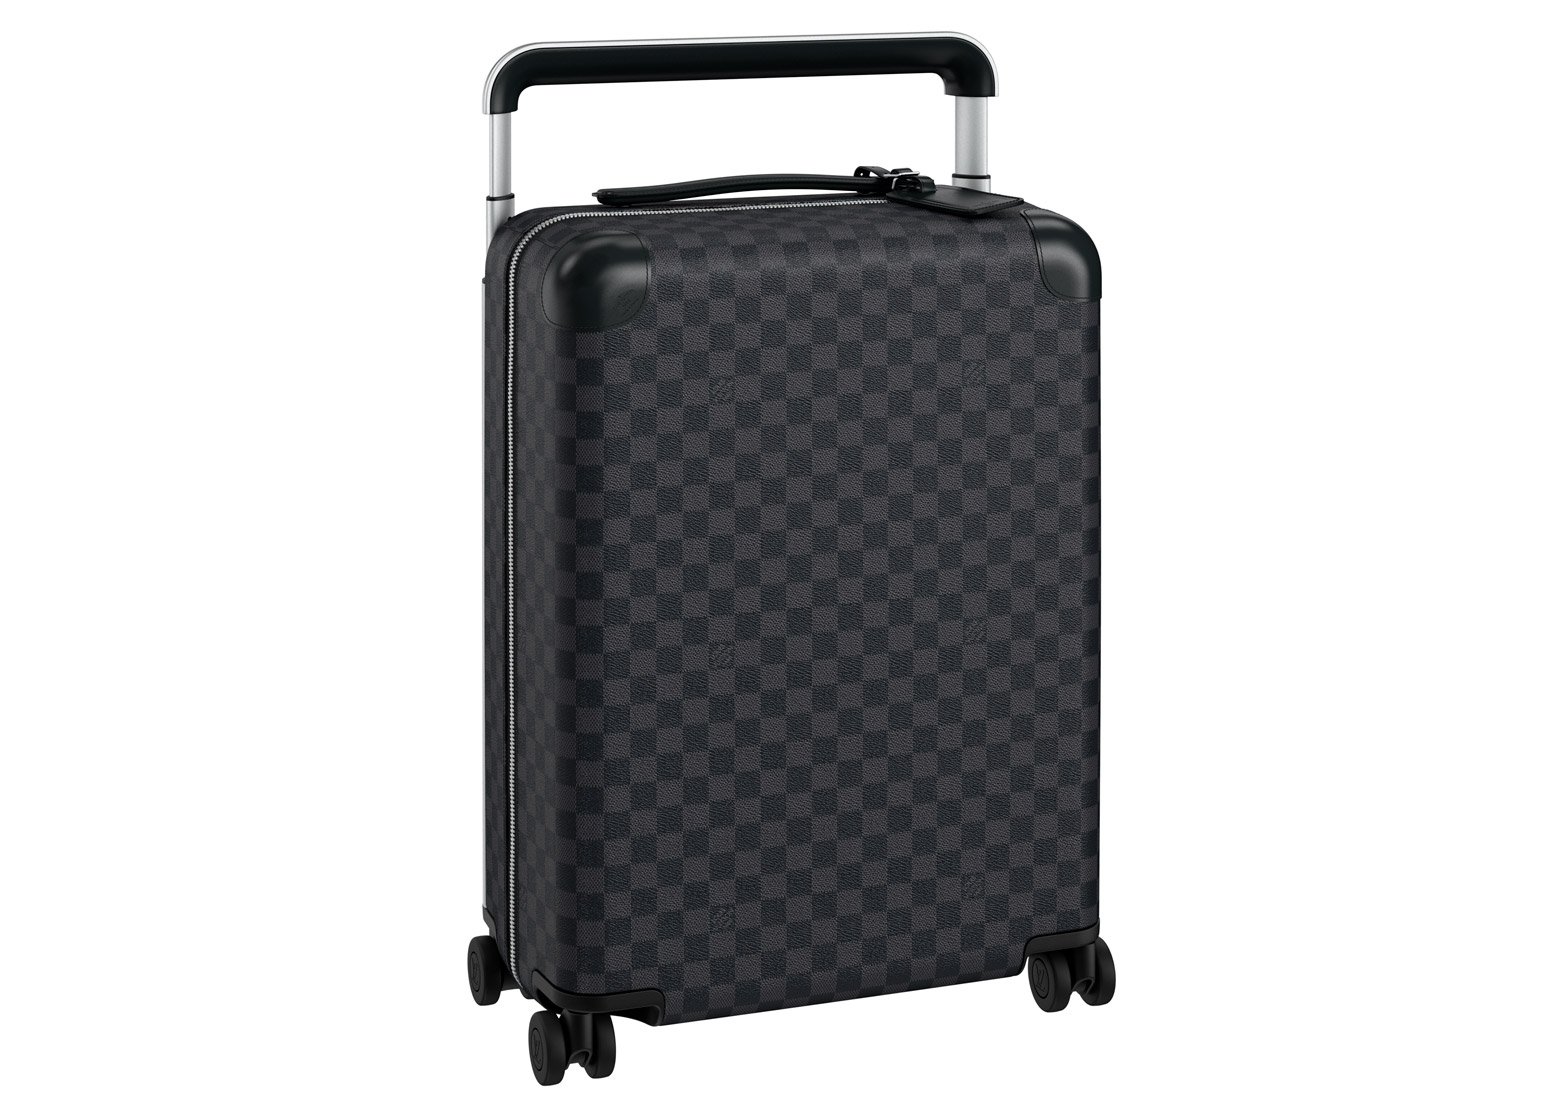 Marc Newson reinvents classic Louis Vuitton rolling luggage